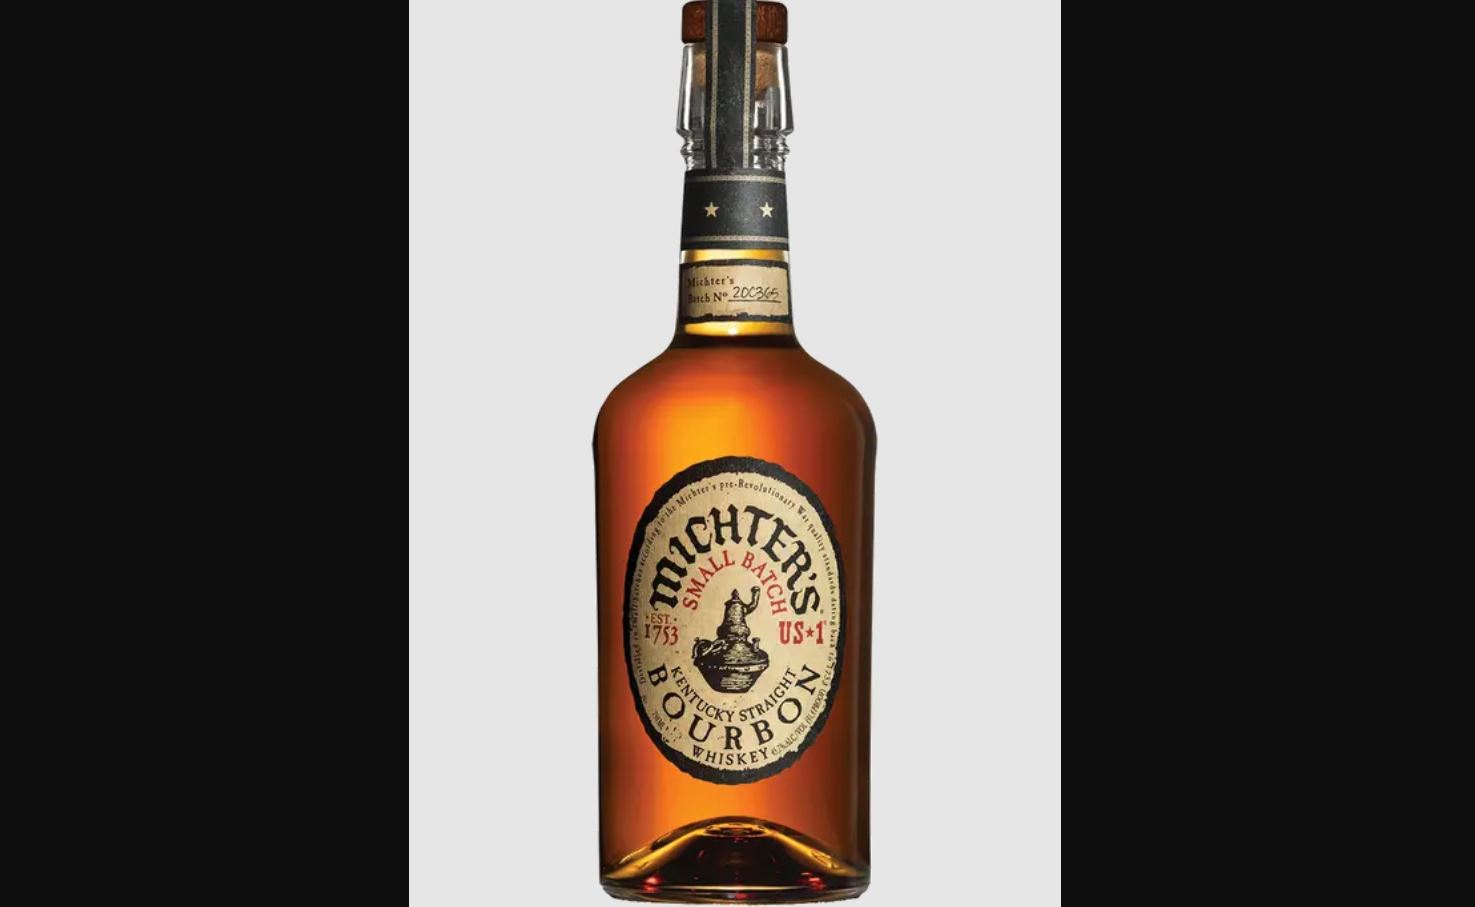 Michter's US-1 Small Batch